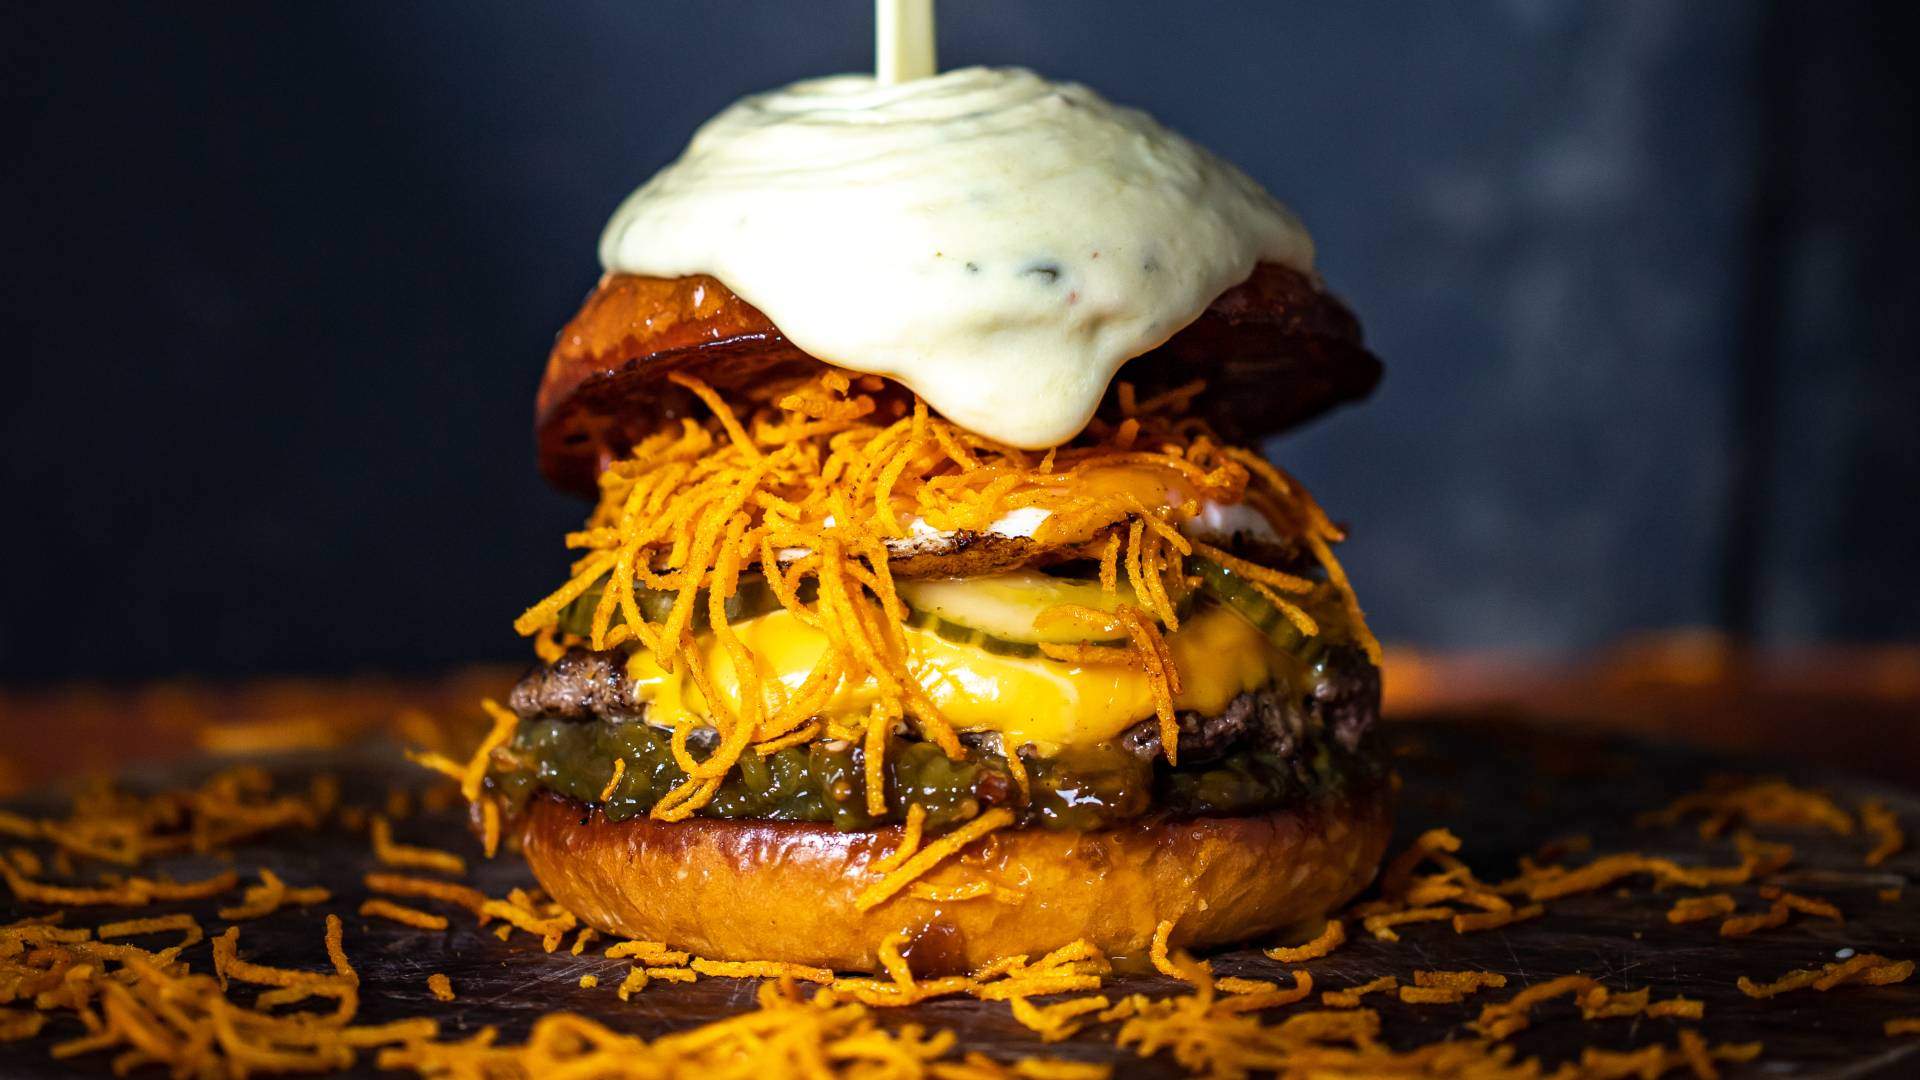 The Seven Burgers We're Most Excited to Try During This Year's Welly on a Plate